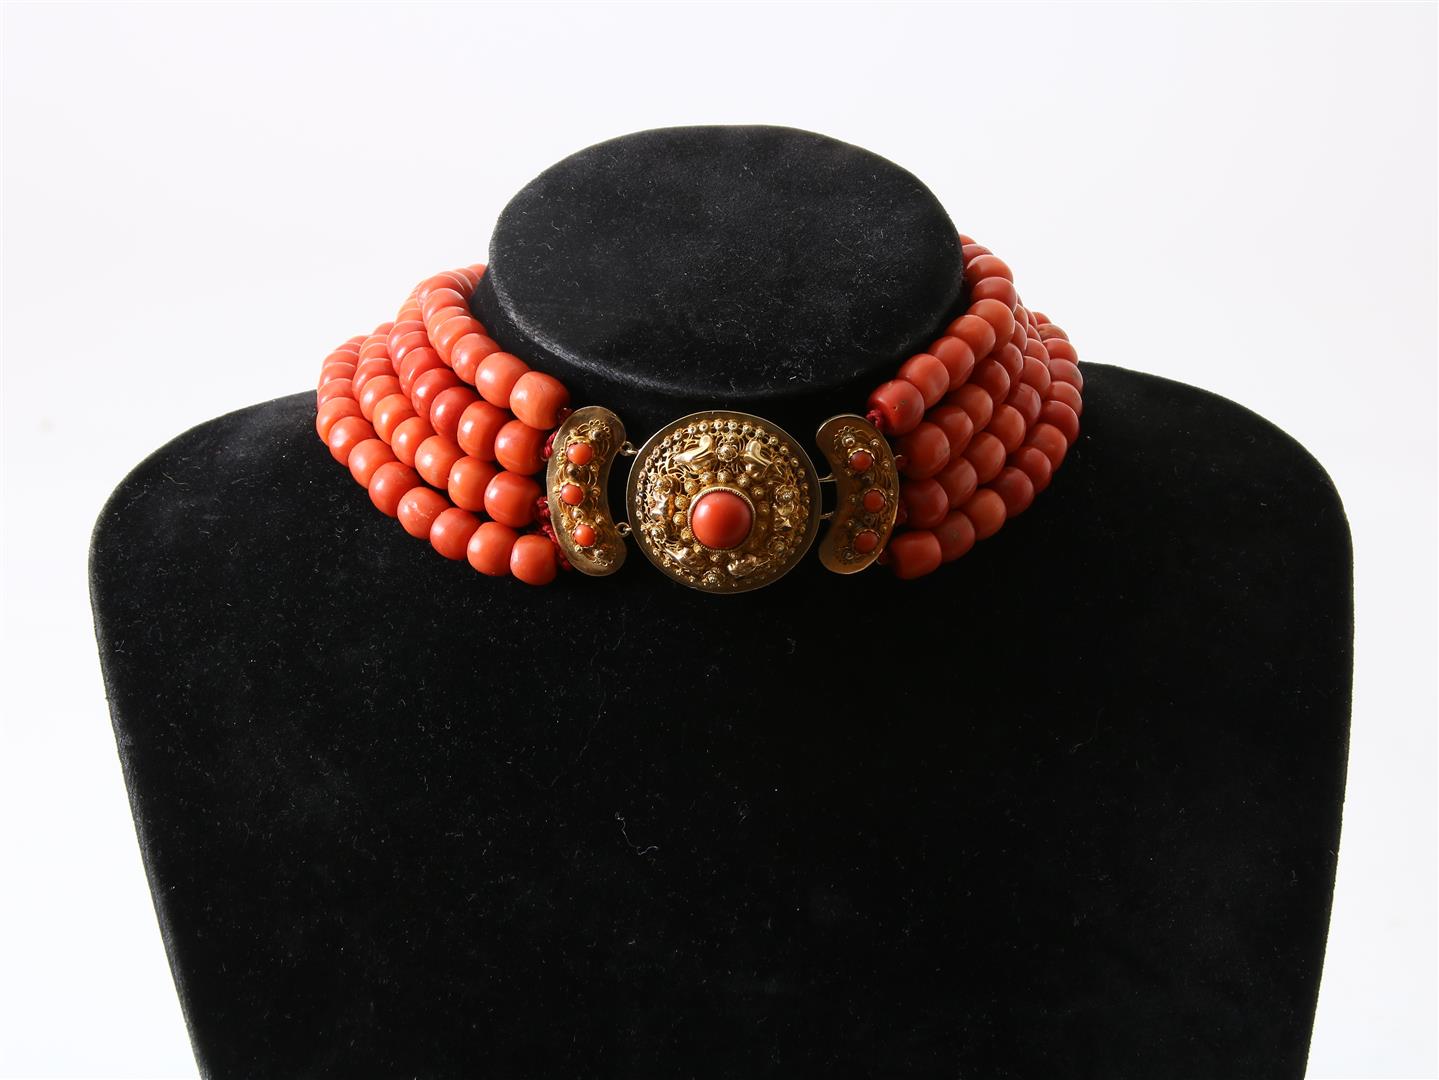 4-row red coral bead necklace with cheese and barrel beads on a gold filigree decorated regional - Image 2 of 3